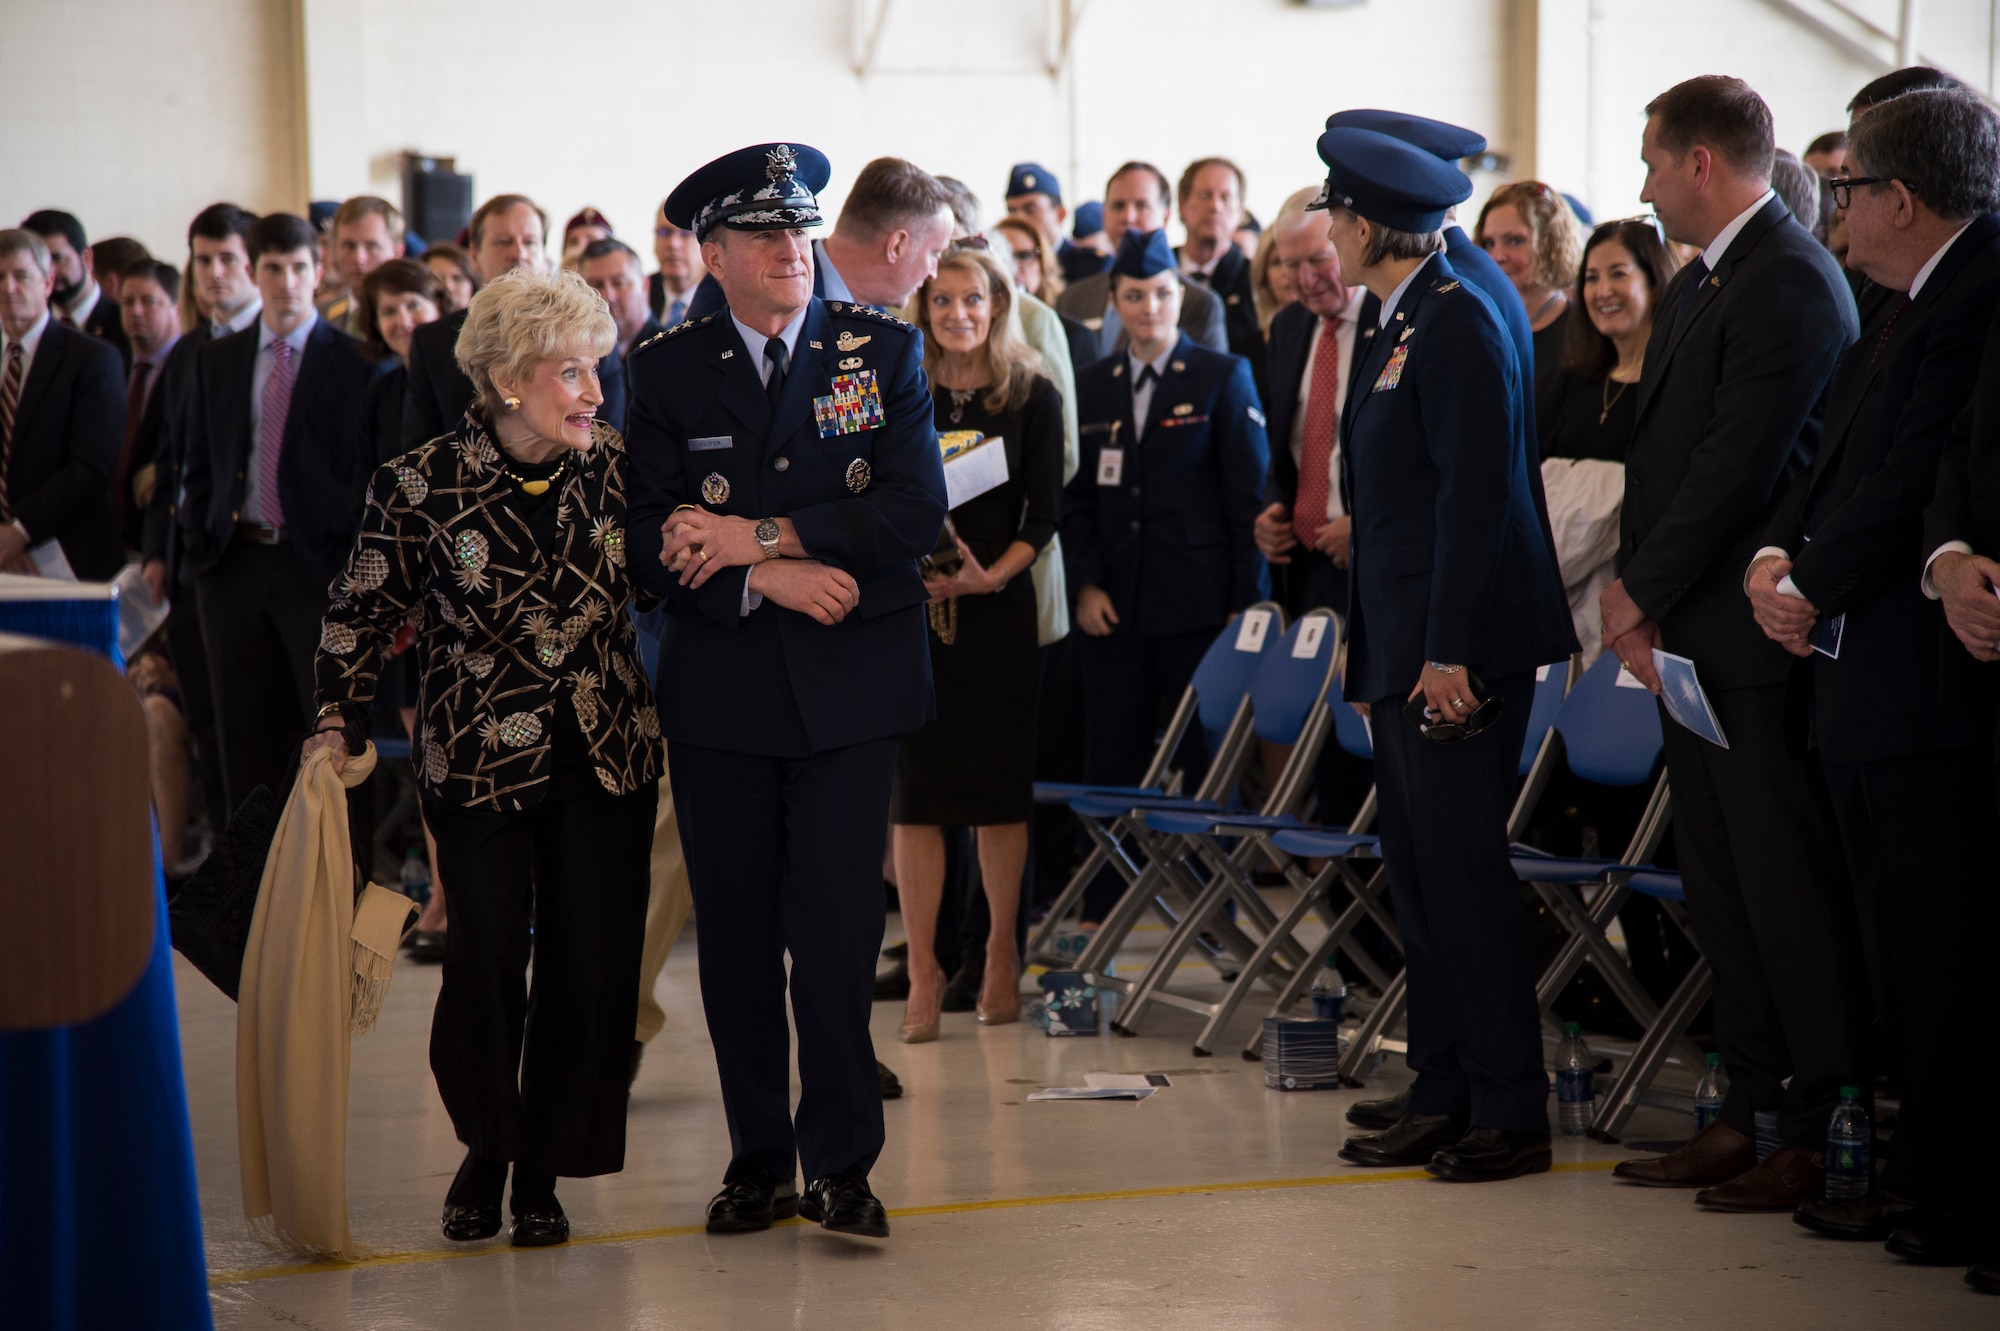 Air Force Chief of Staff Gen. David L. Goldfein escorts Dr. Lucy Greene during the Celebration of Life ceremony honoring Mr. W. Parker Greene, March 14, 2019, at Moody Air Force Base, Ga. Greene, a steadfast Air Force advocate and one of the most influential military civic leaders passed away Dec. 18, 2018. (U.S. Air Force Photo by Andrea Jenkins)